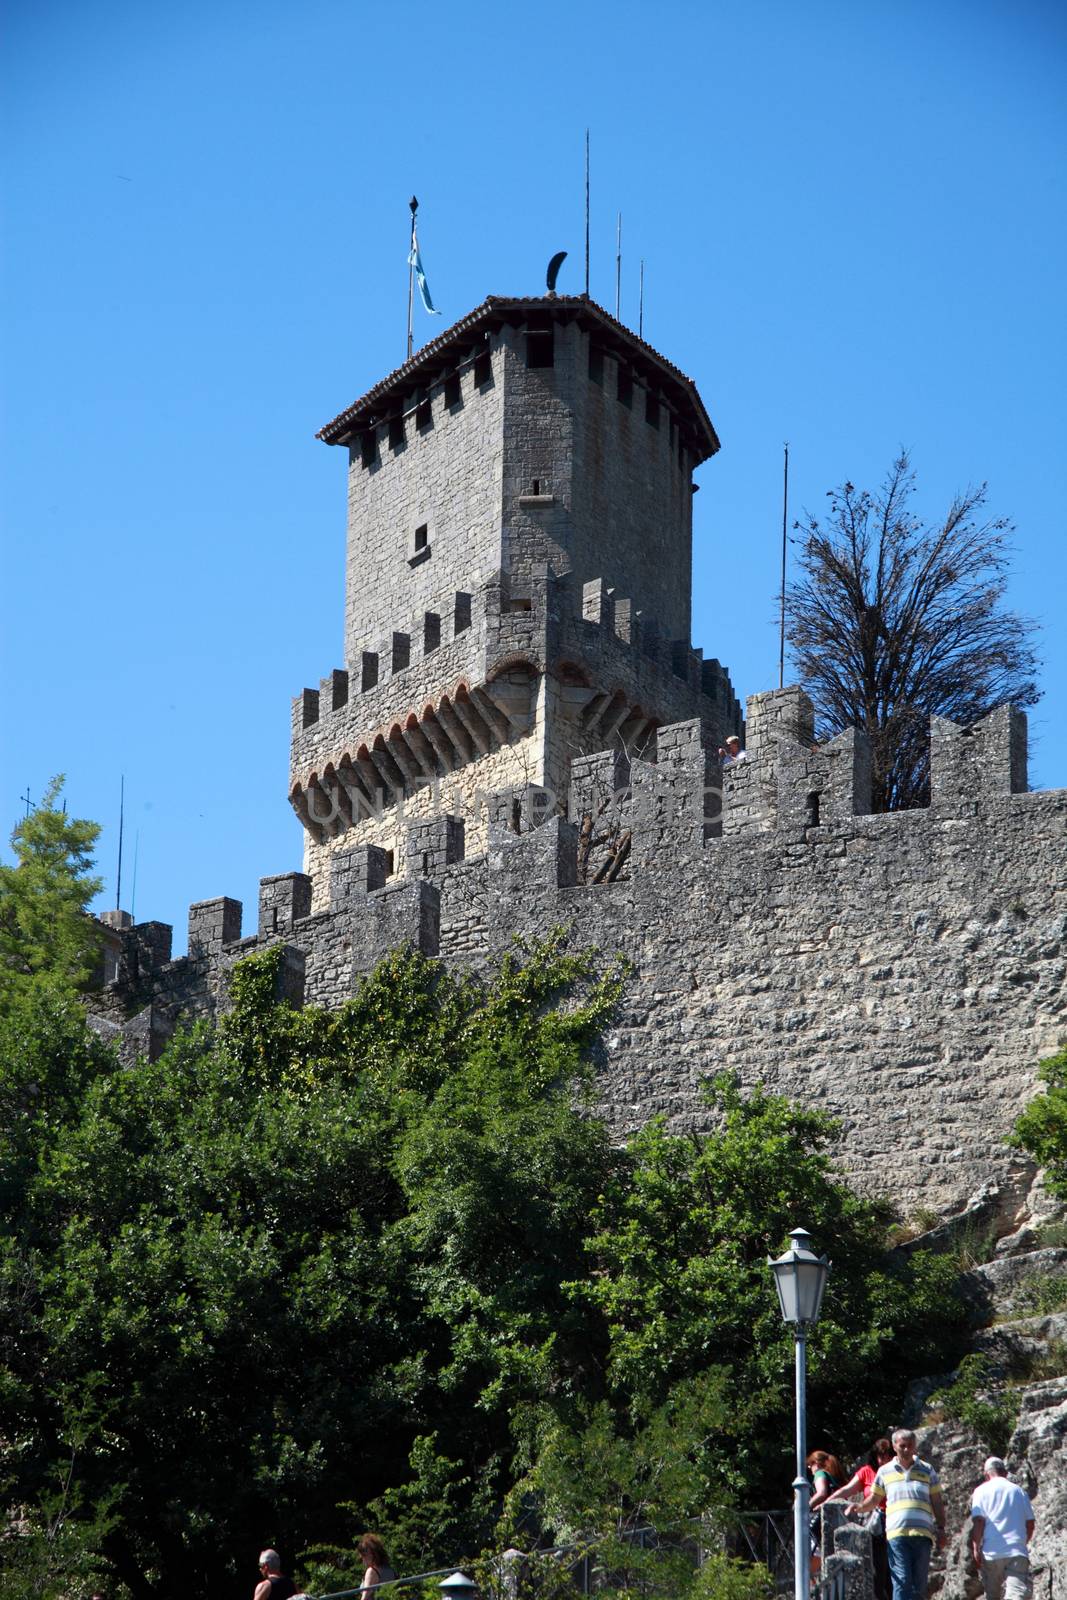 View of a tower and the walls of the San Marino Castle